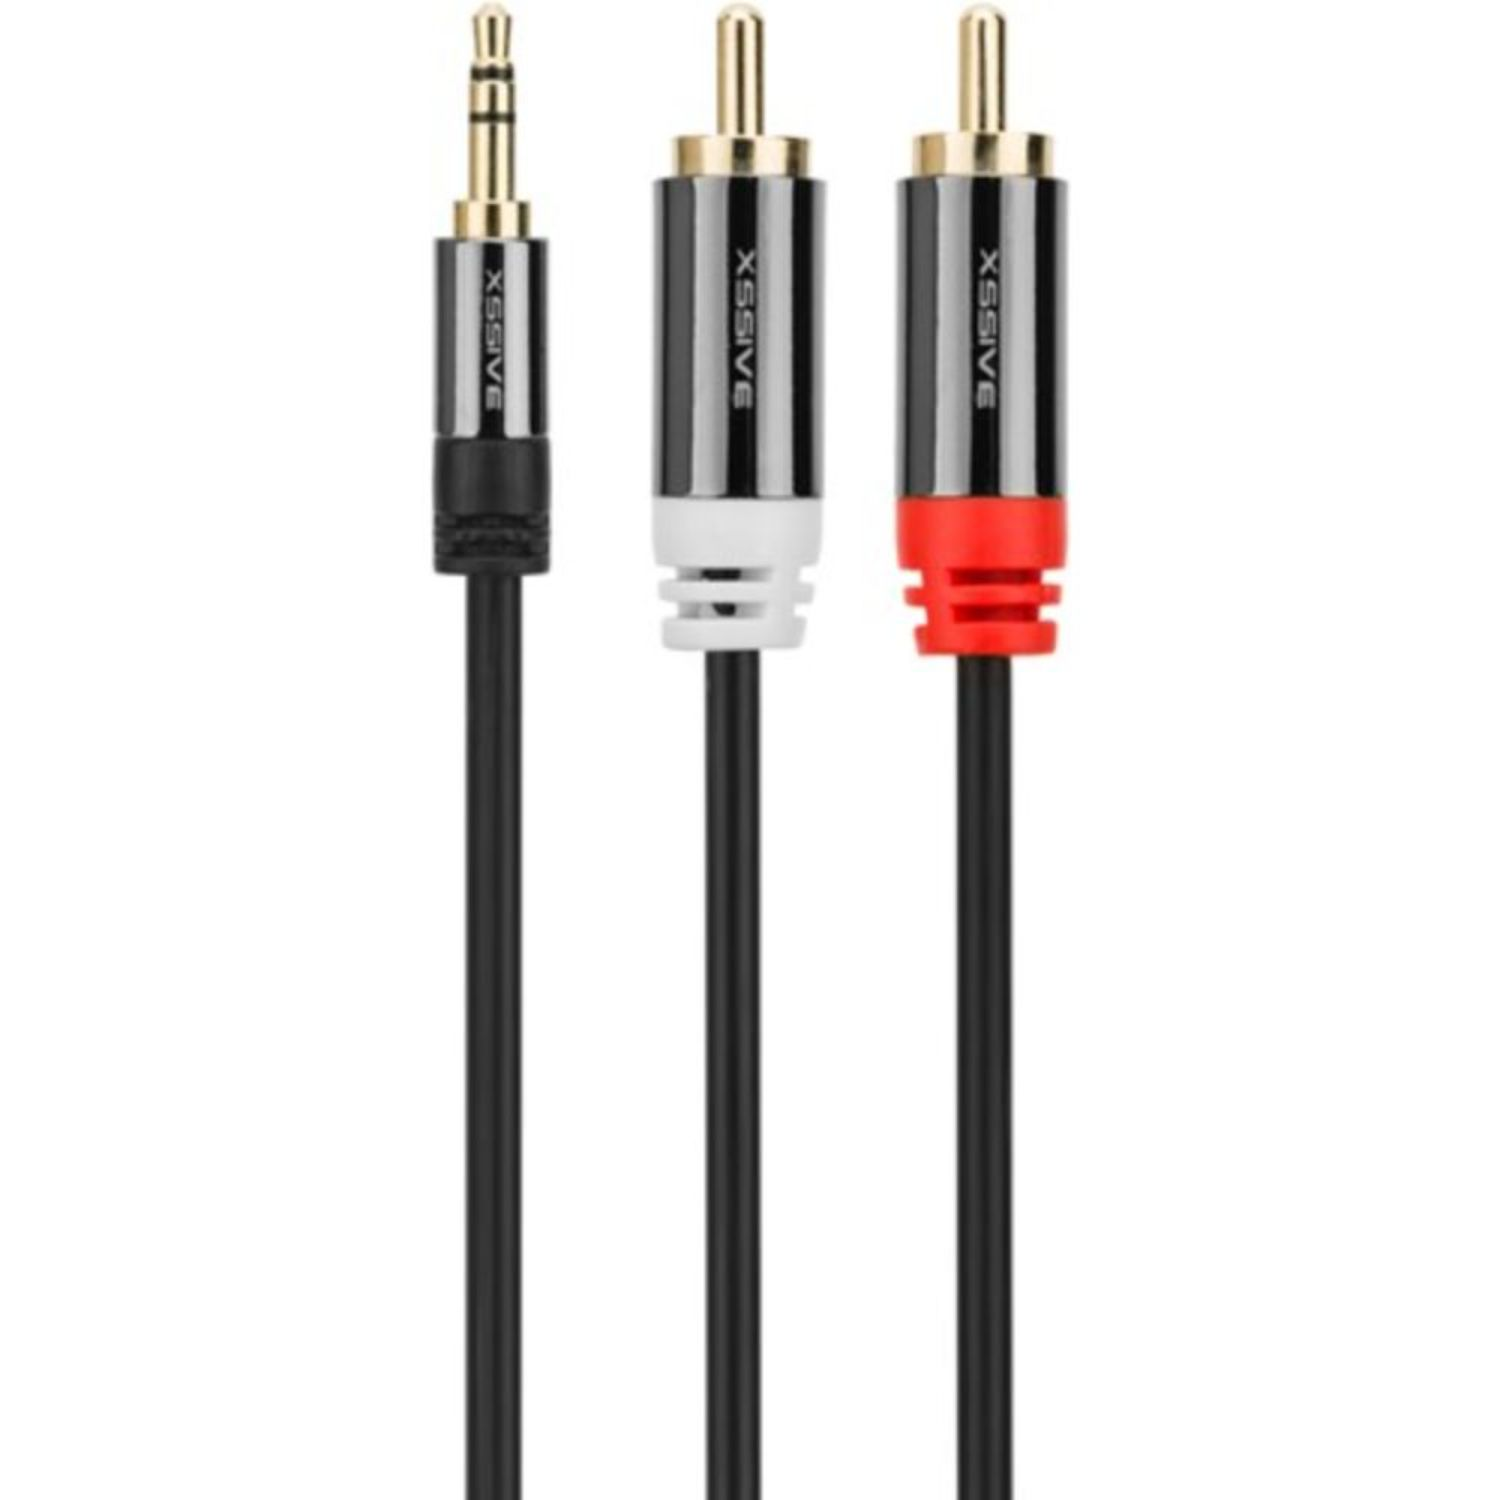 COFI 3.5MM to RCA Adapter, Cable1.8M 2 Schwarz